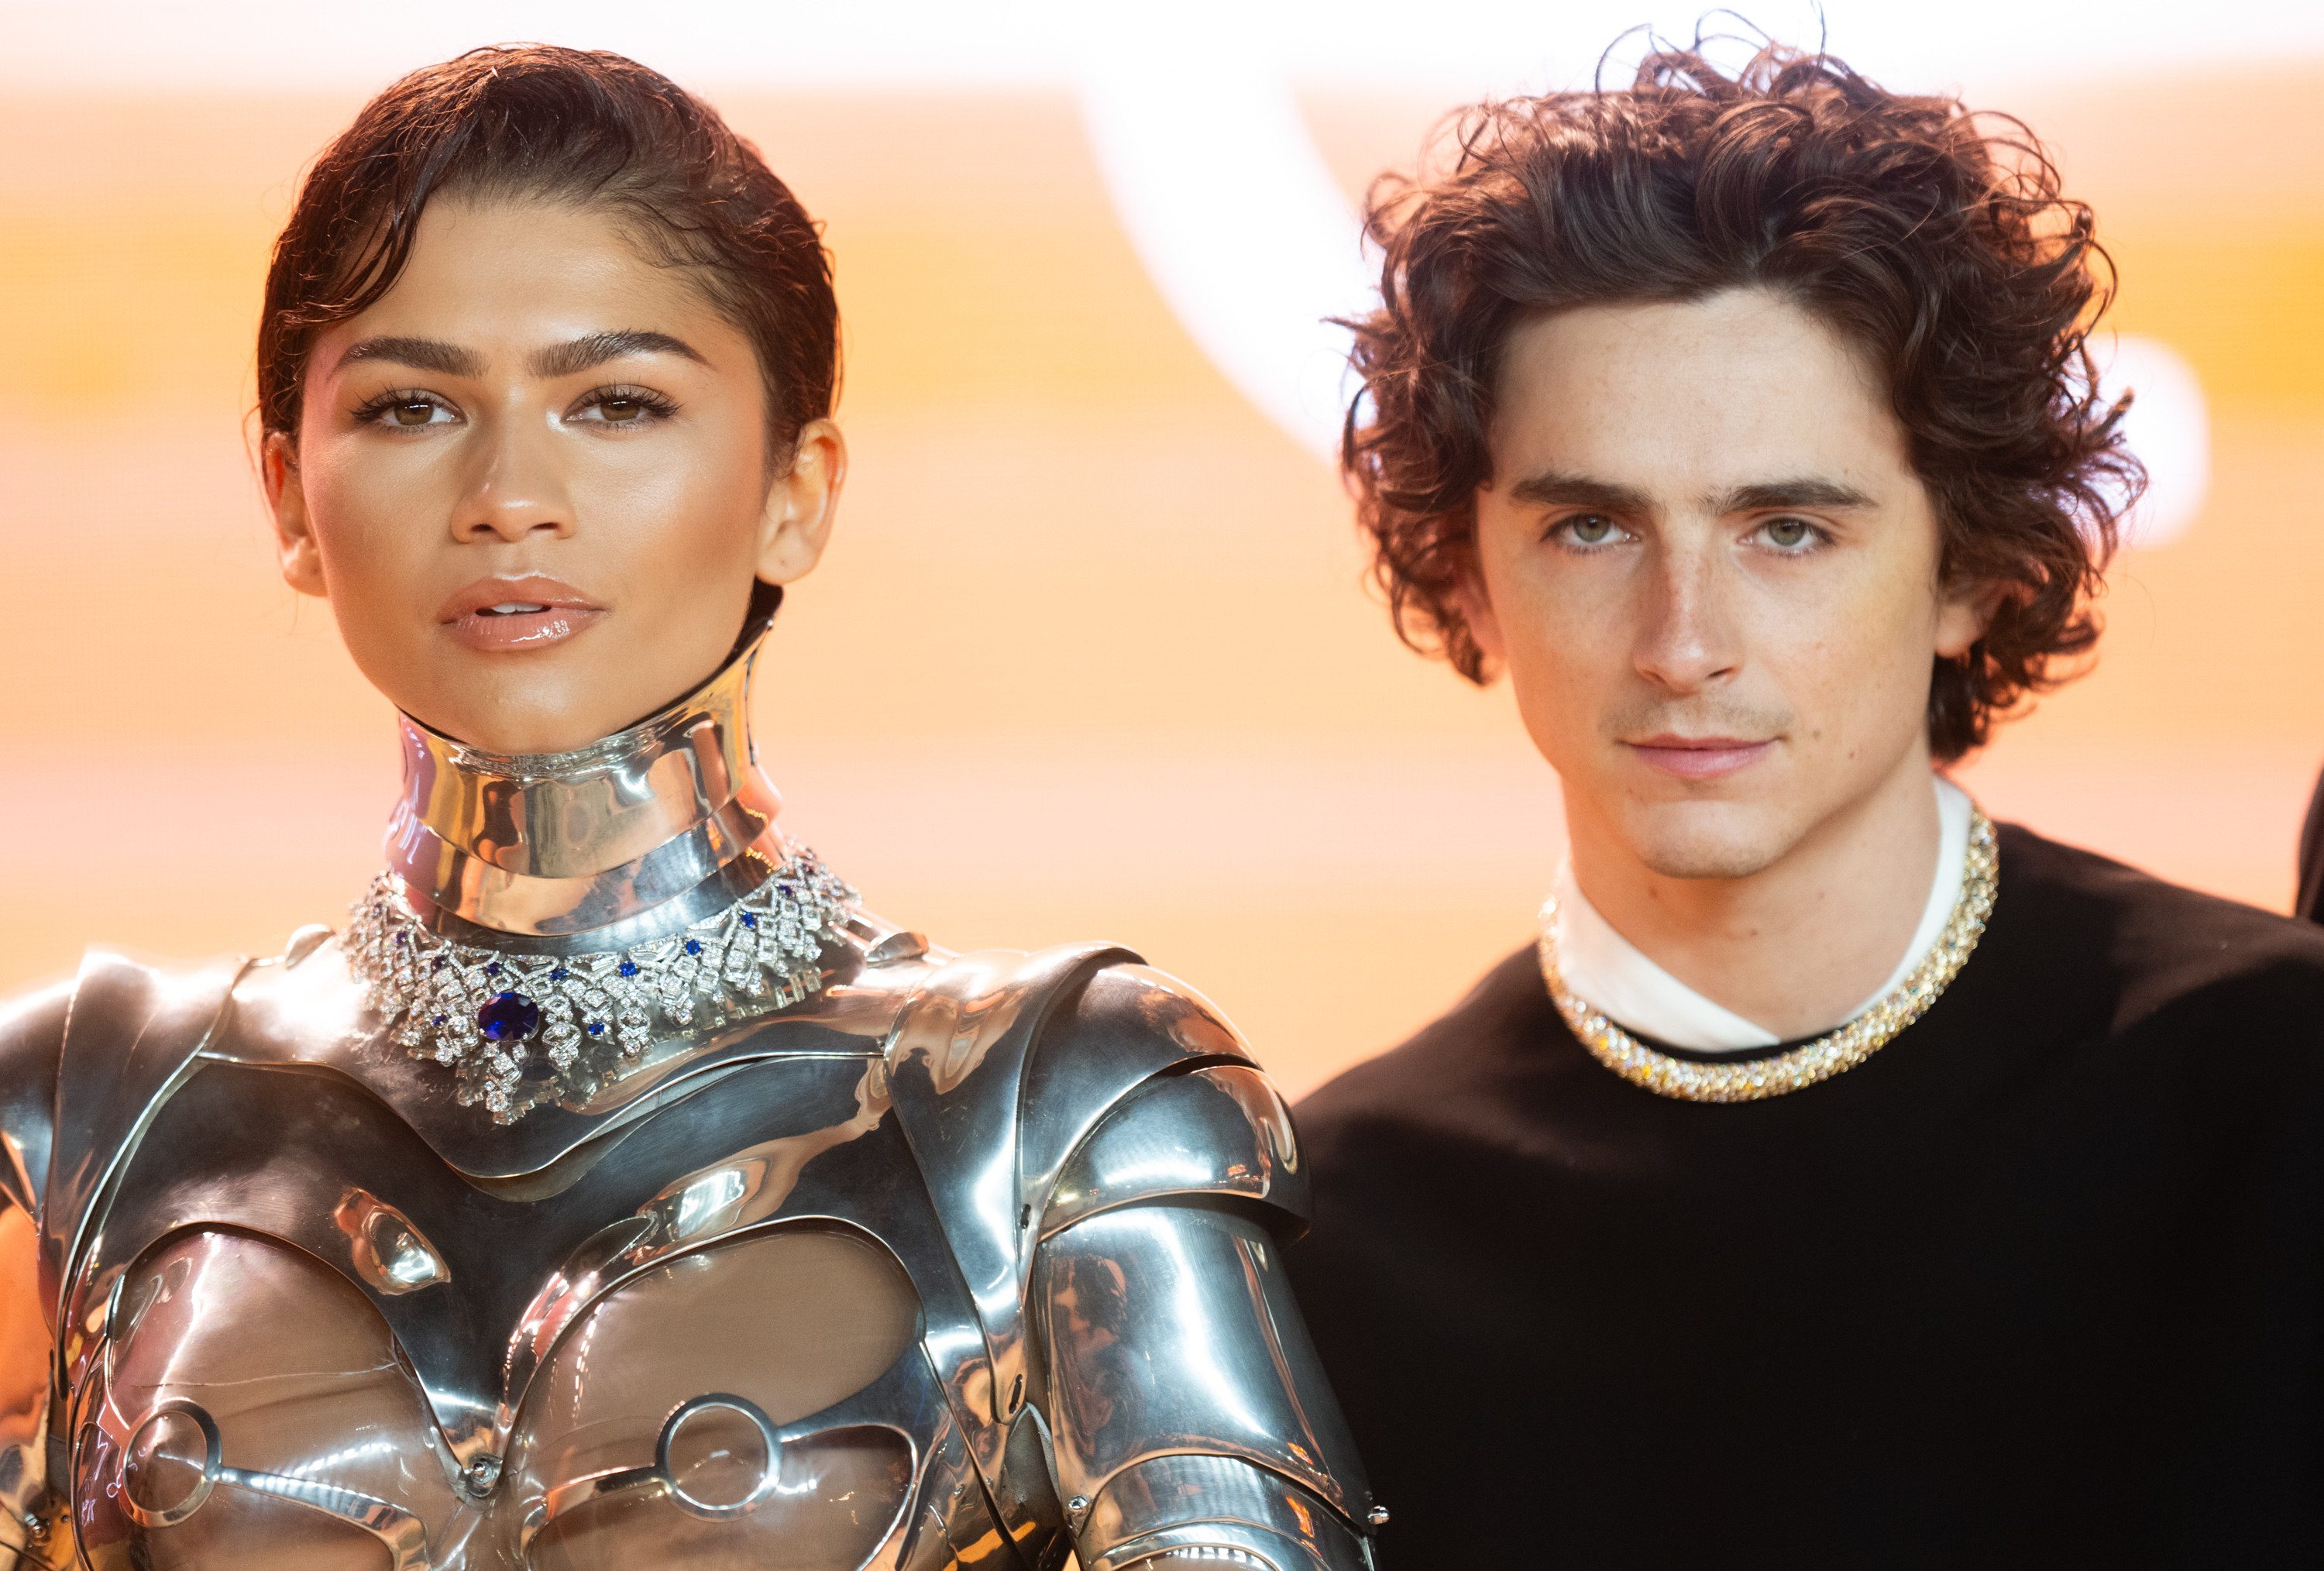 Zendaya in a metallic outfit and Timothée Chalamet in a sweater, standing side by side